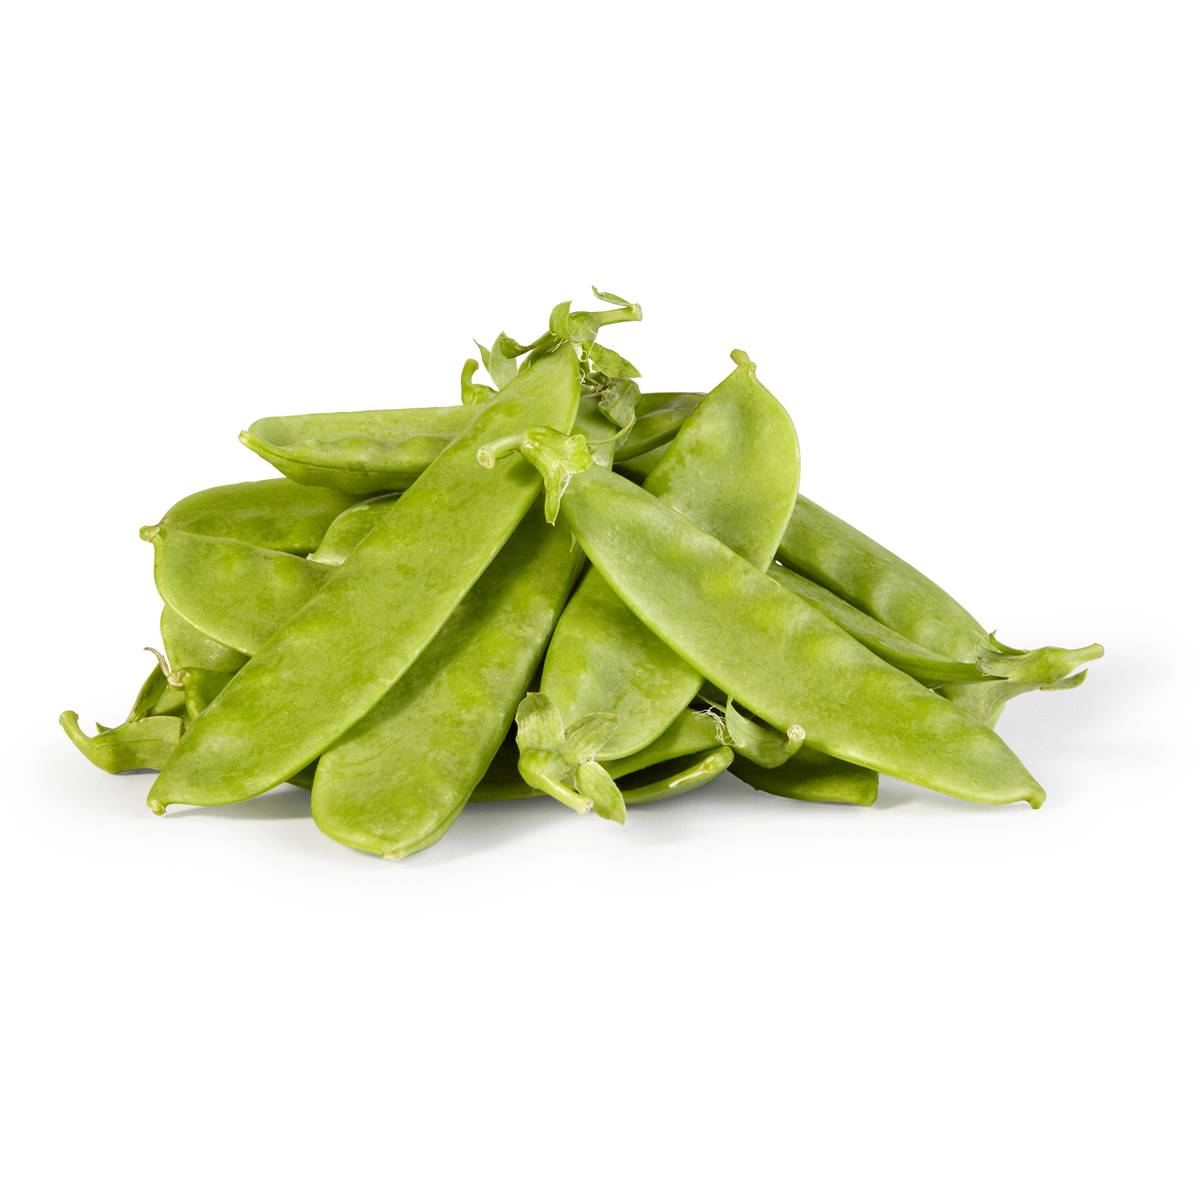 Calories in The Odd Bunch Snow Peas